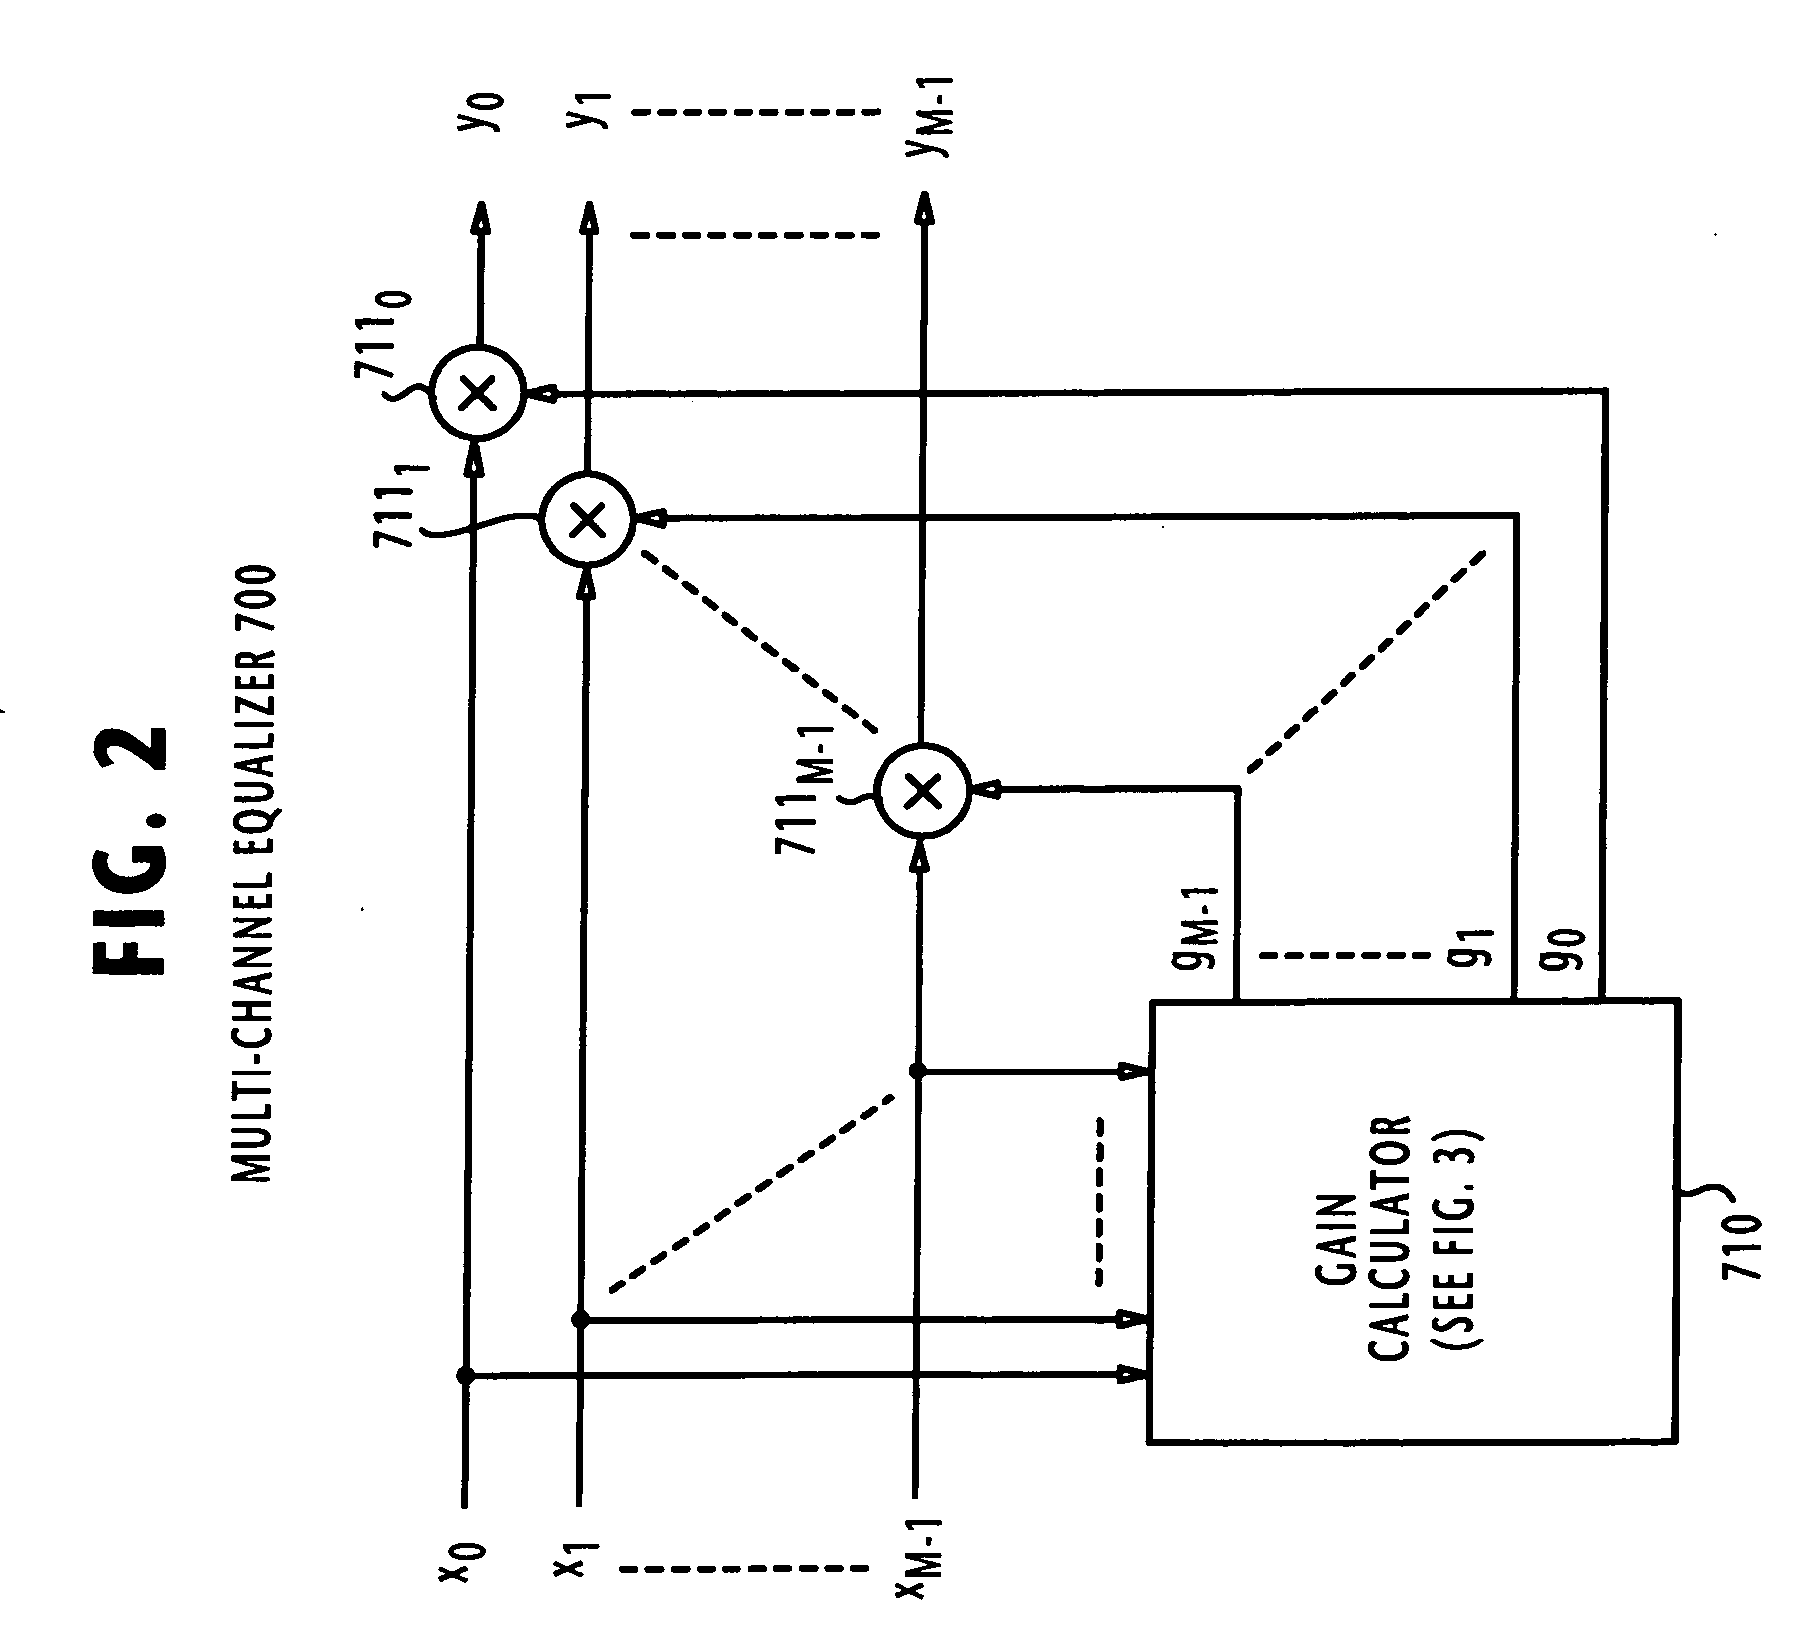 Signal processing system and method for calibrating channel signals supplied from an array of sensors having different operating characteristics